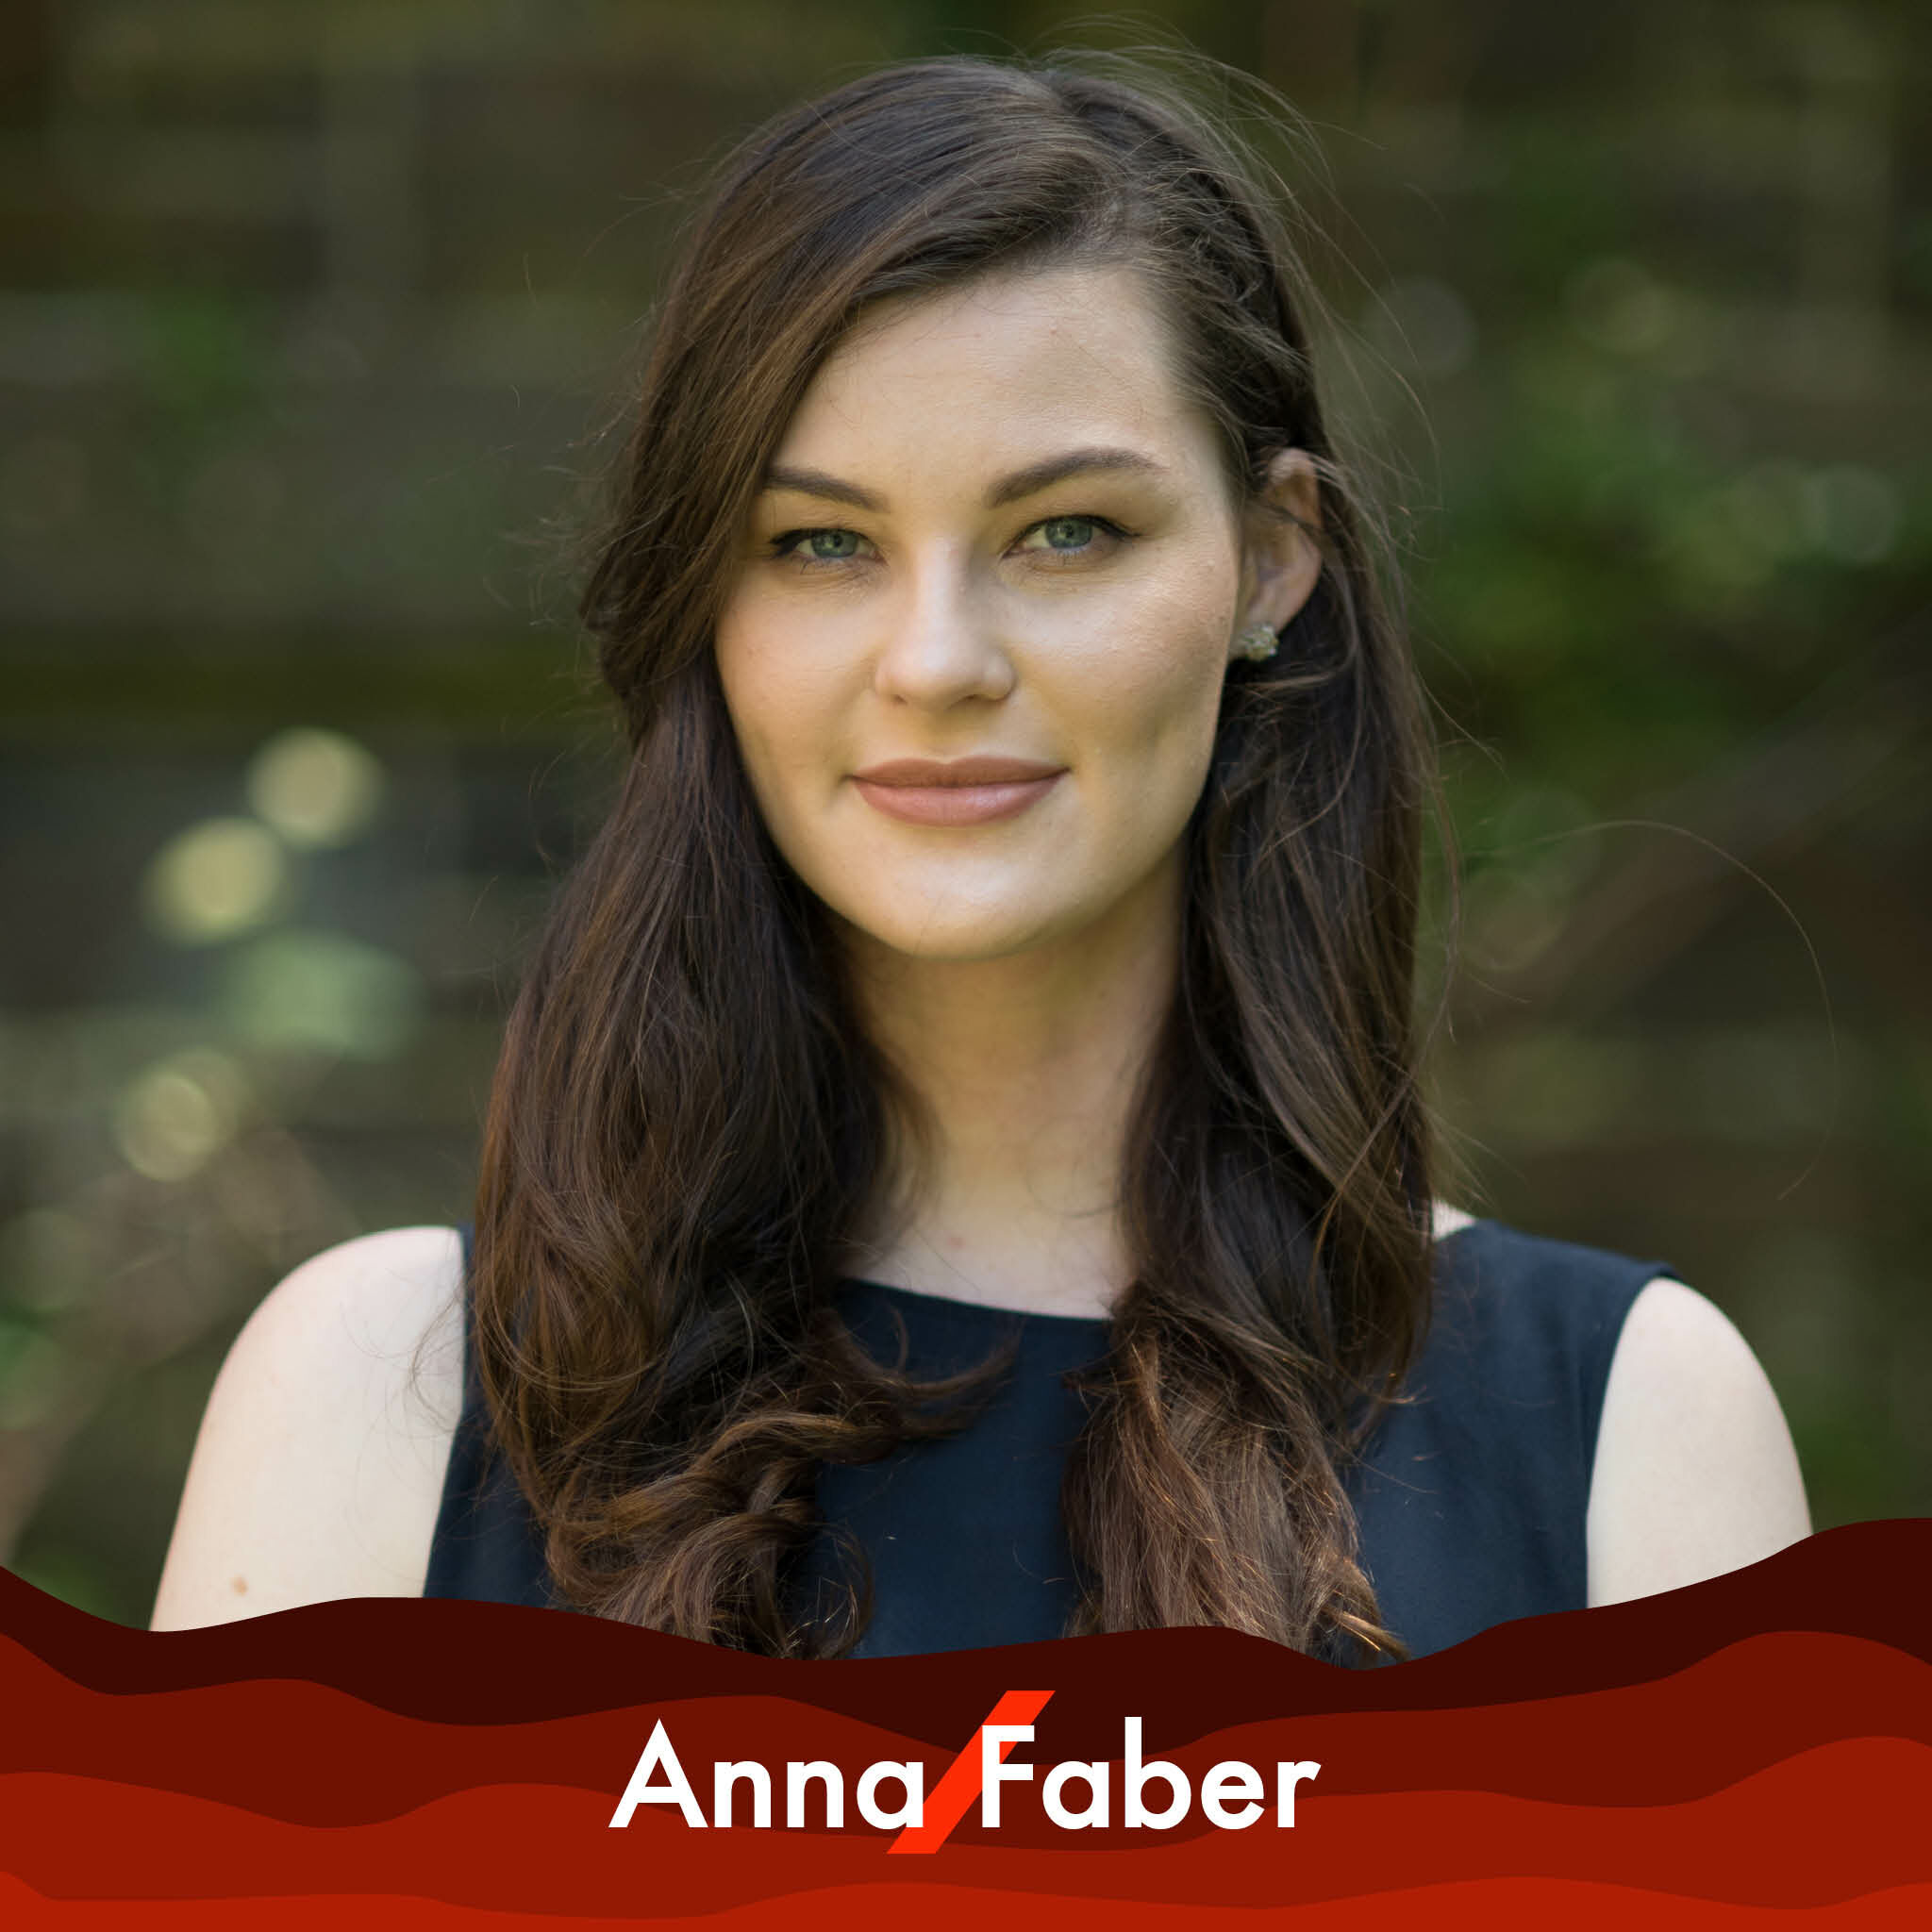 A picture of Anna Faber